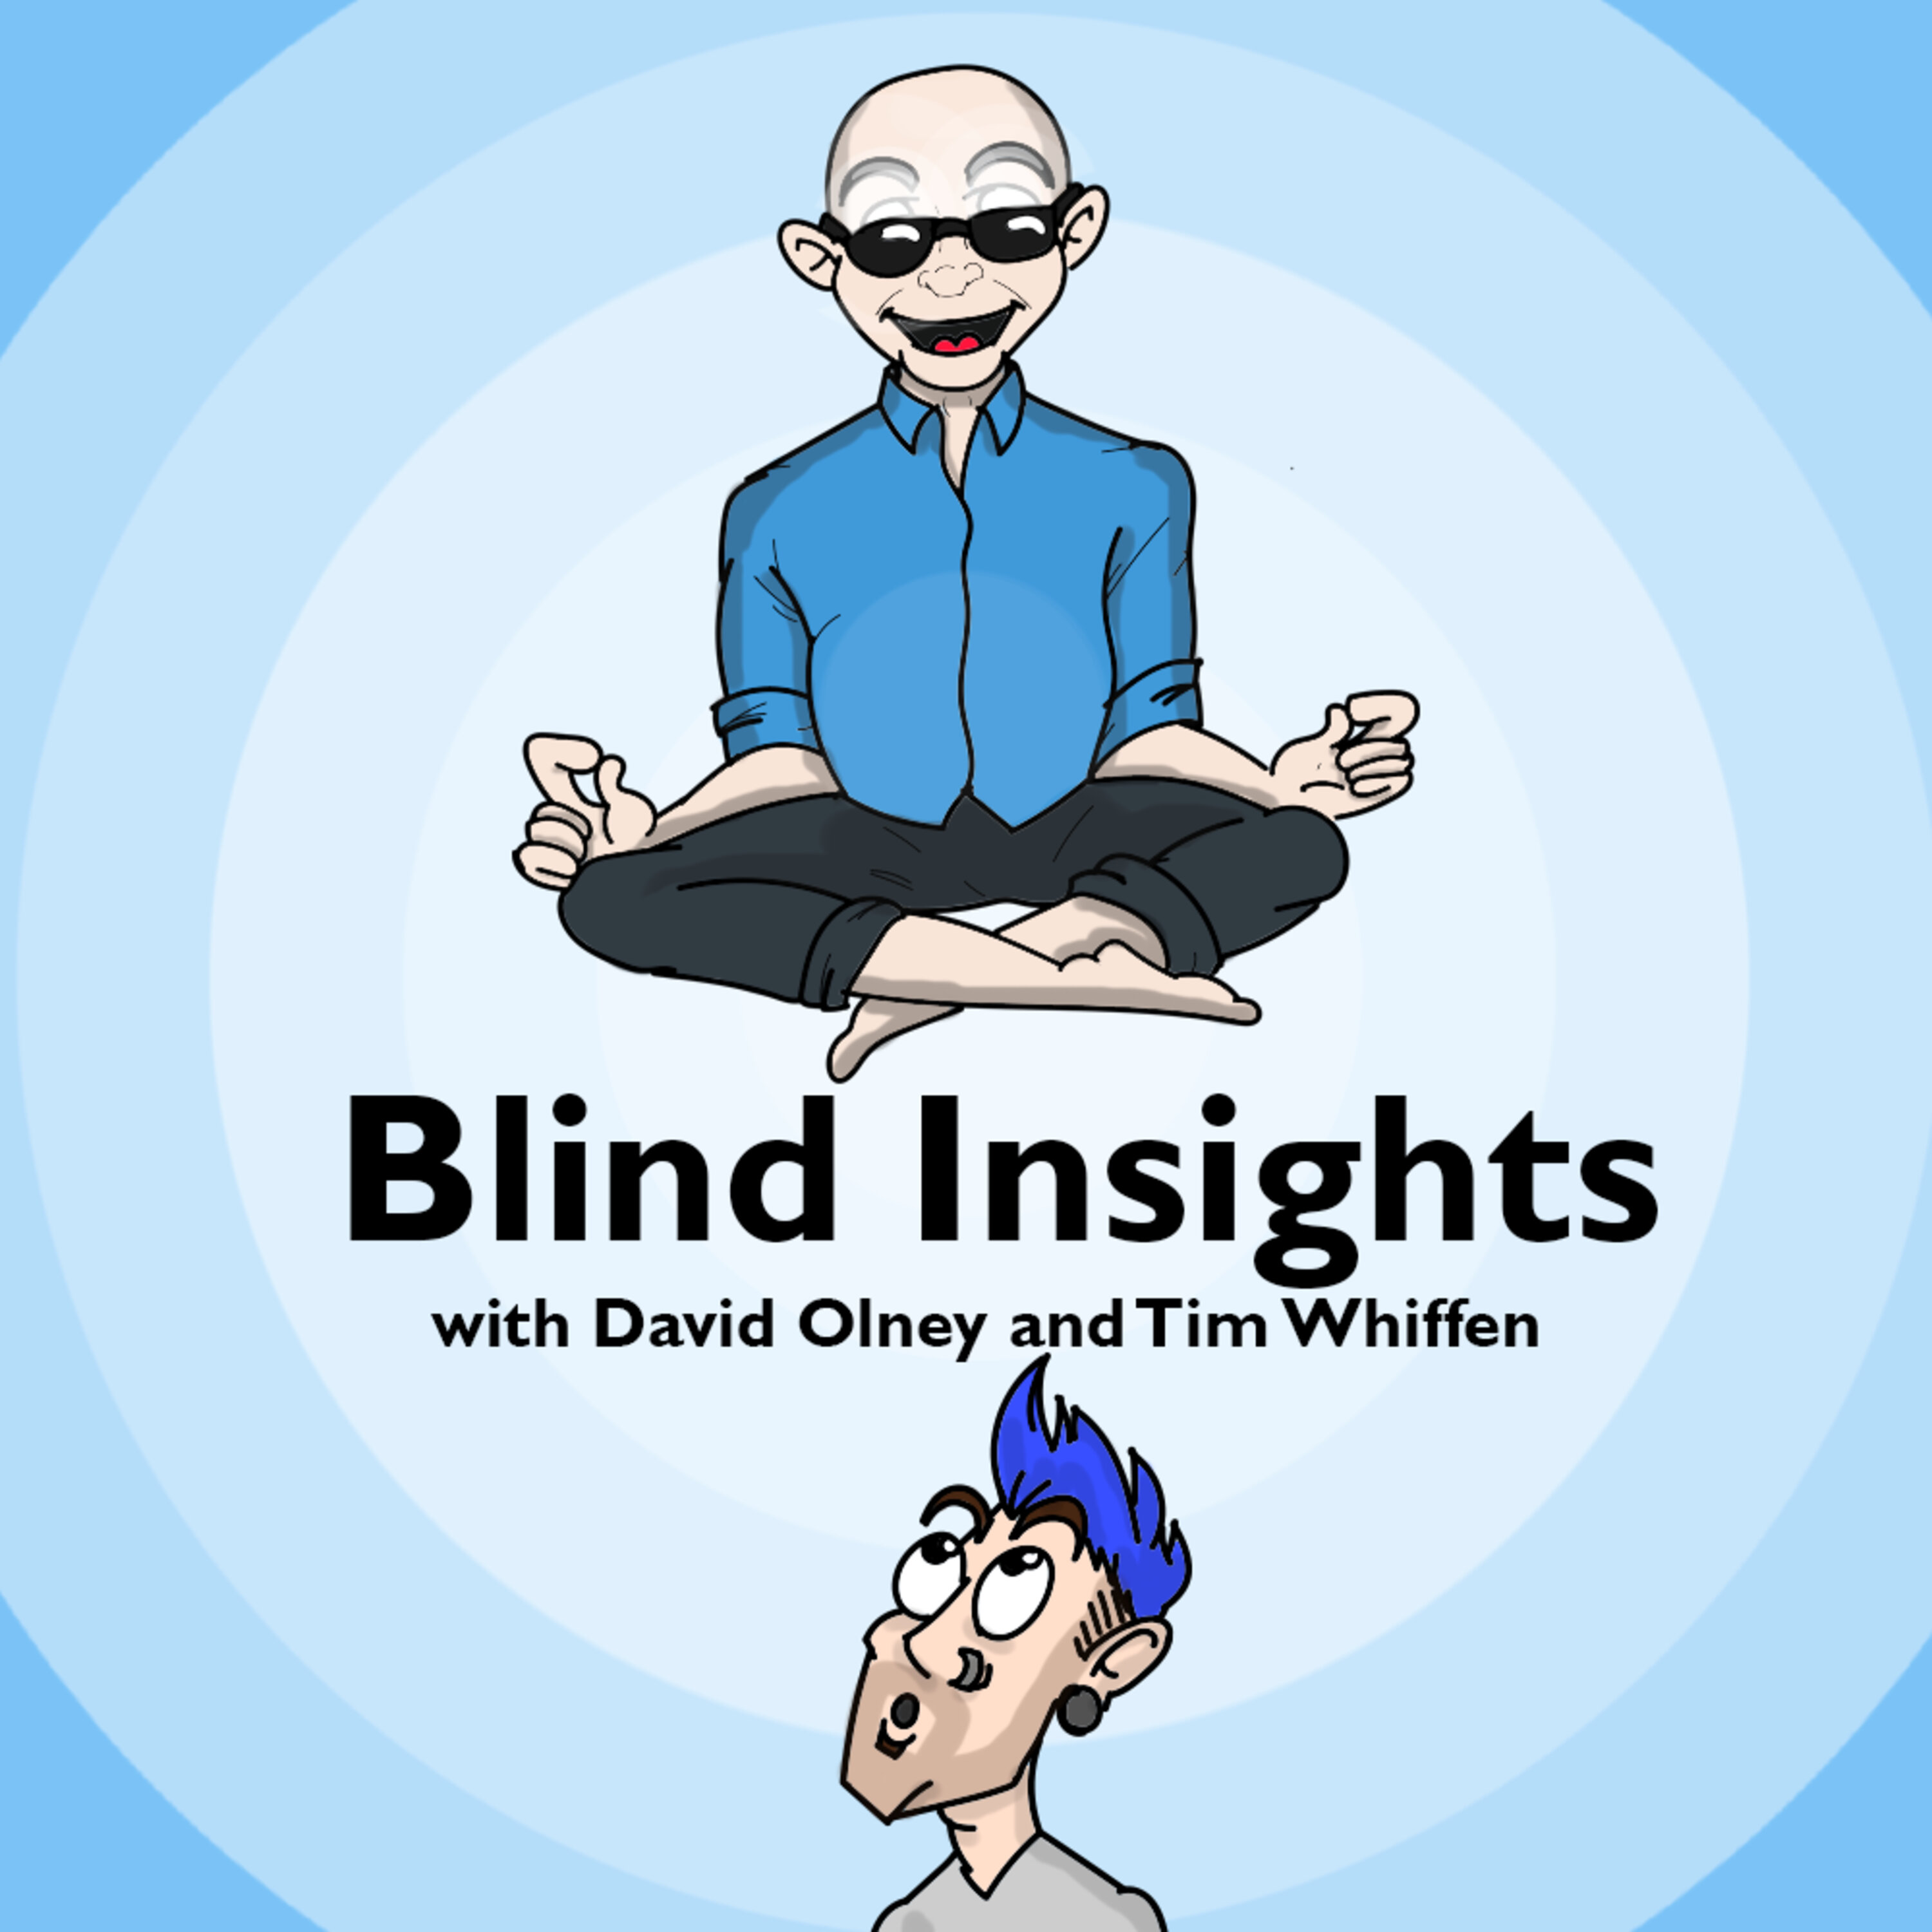 What to expect - Blind Insights with David Olney